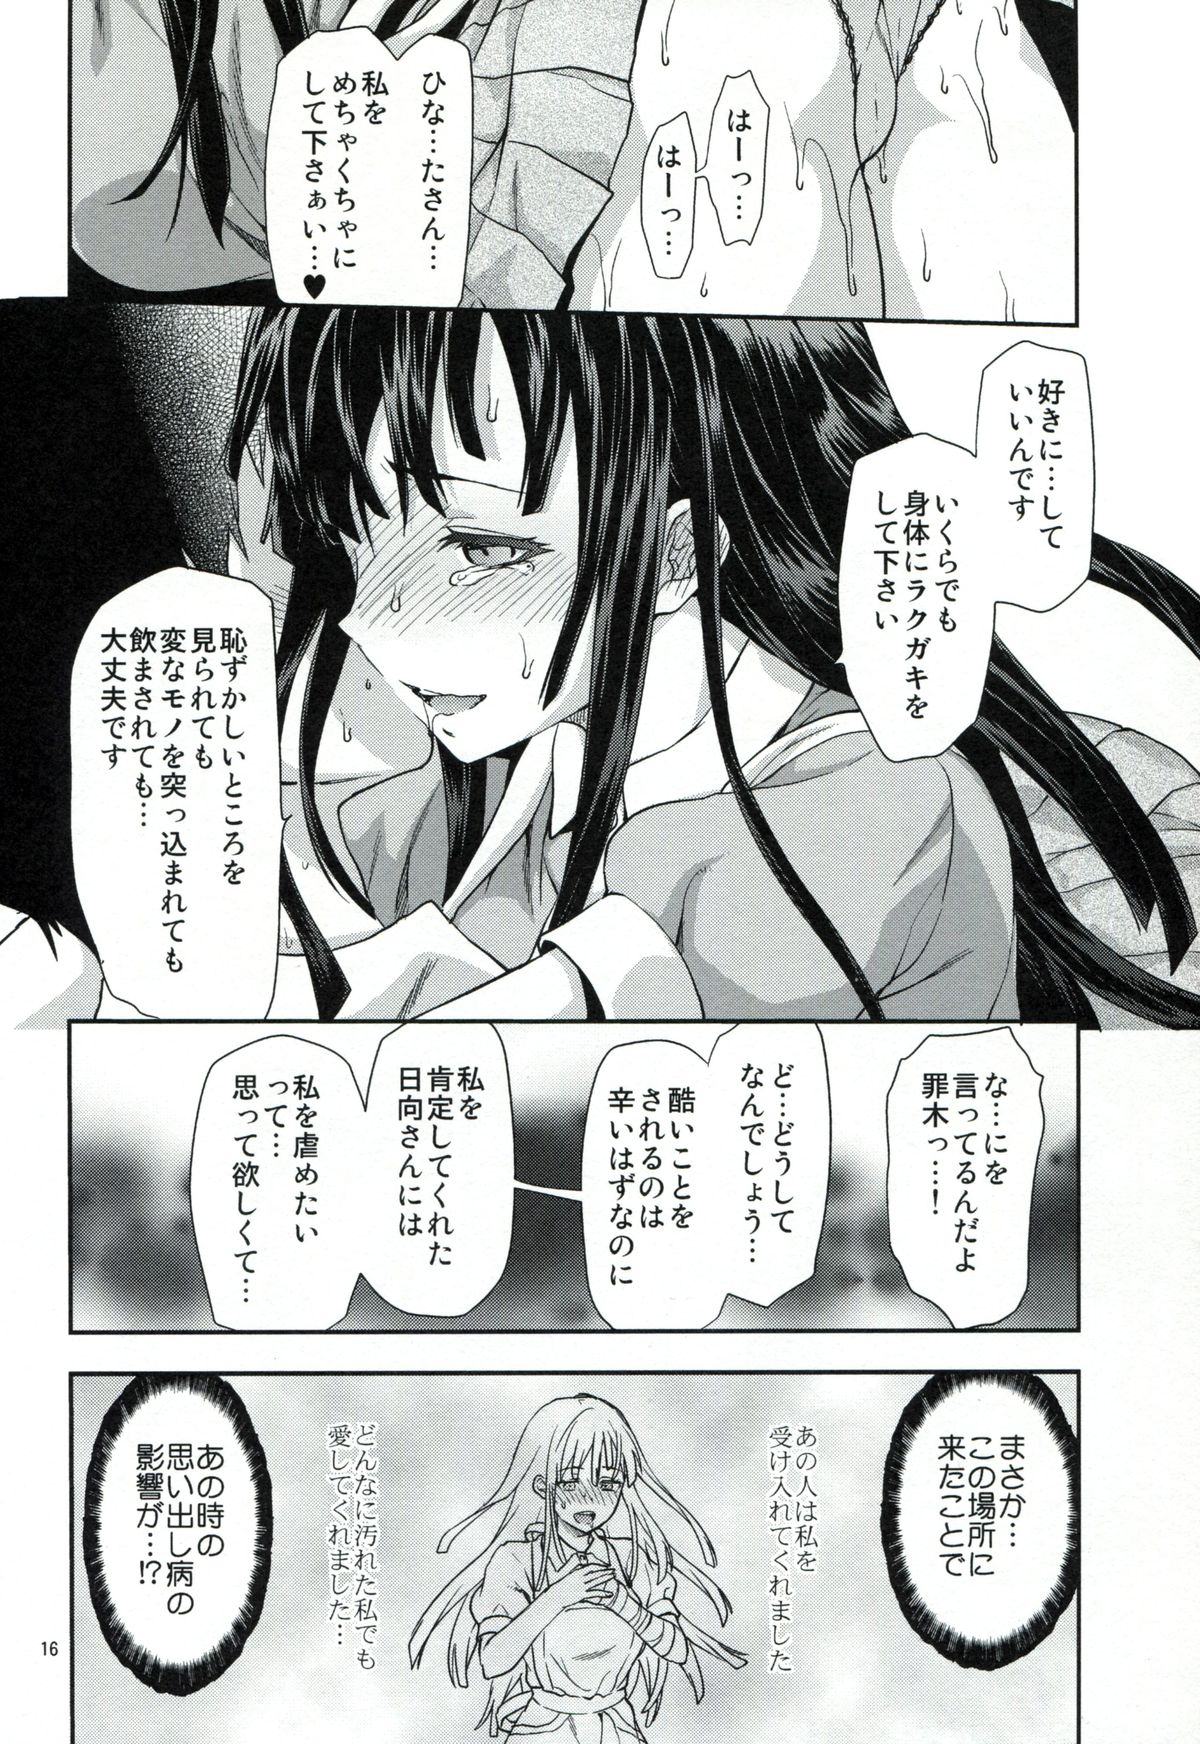 (C85) [Lv.X+ (柚木N')] STAND BY ME (スーパーダンガンロンパ2)